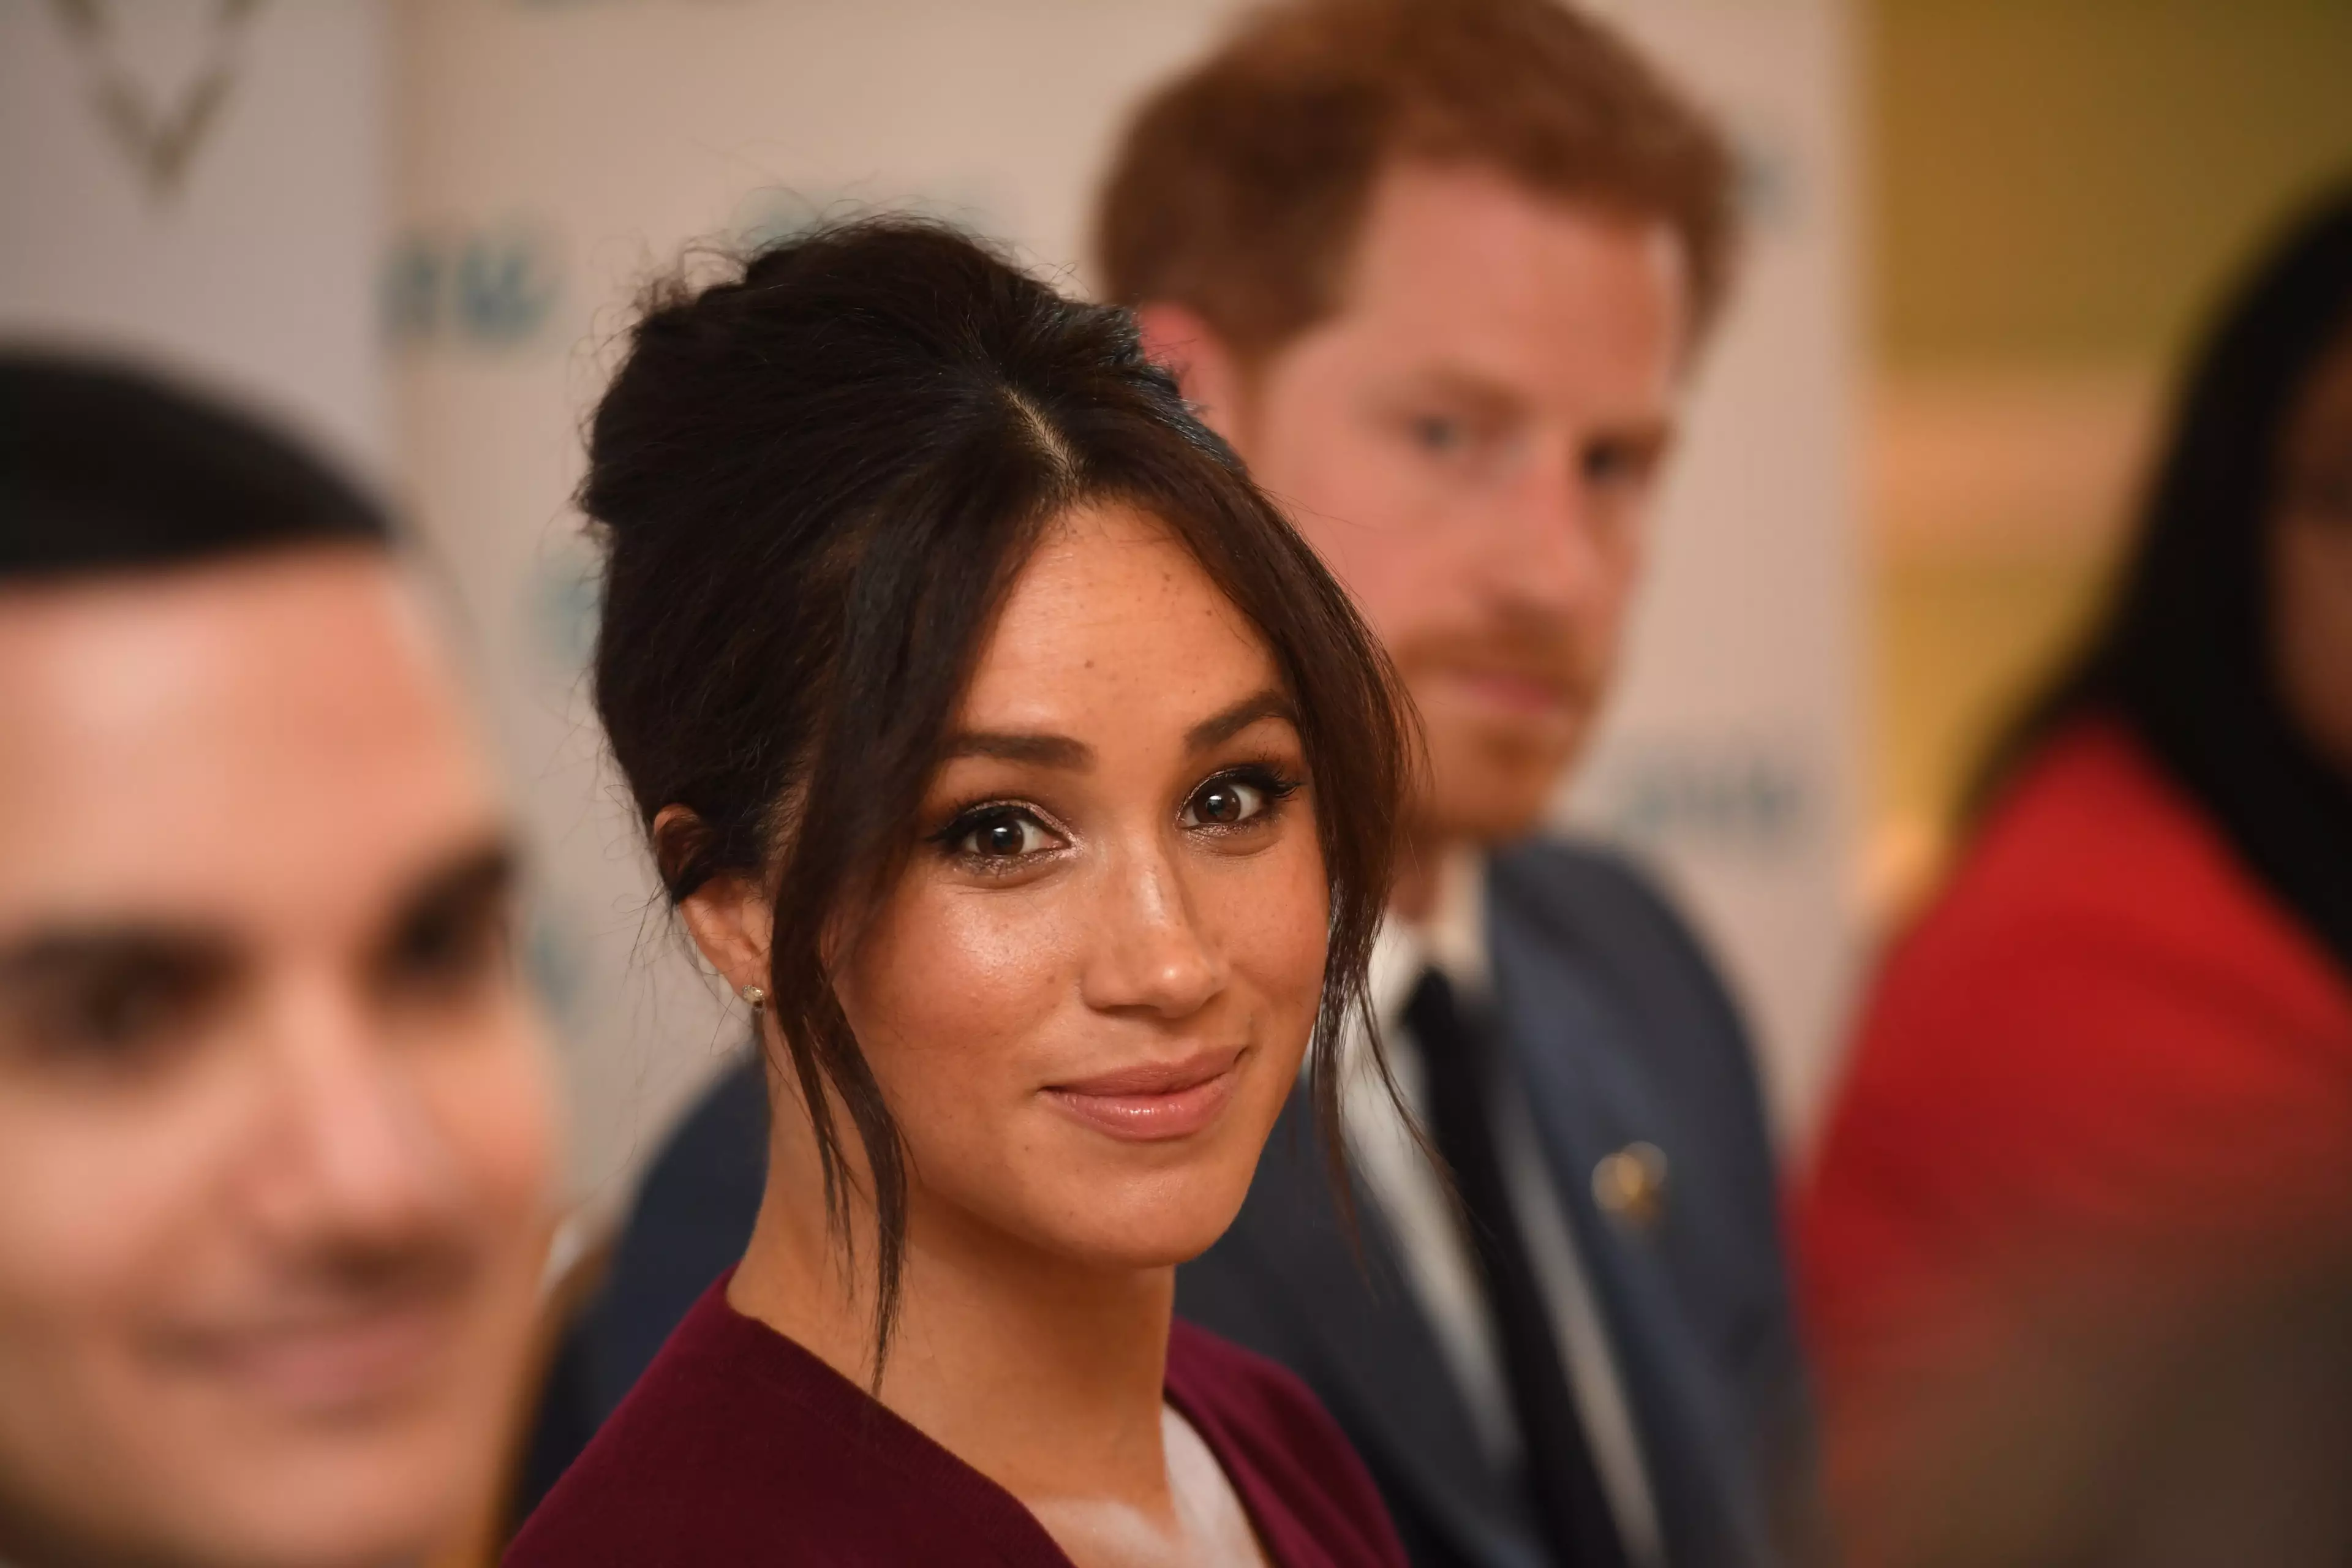 Carr poked fun at Meghan Markle (pictured).